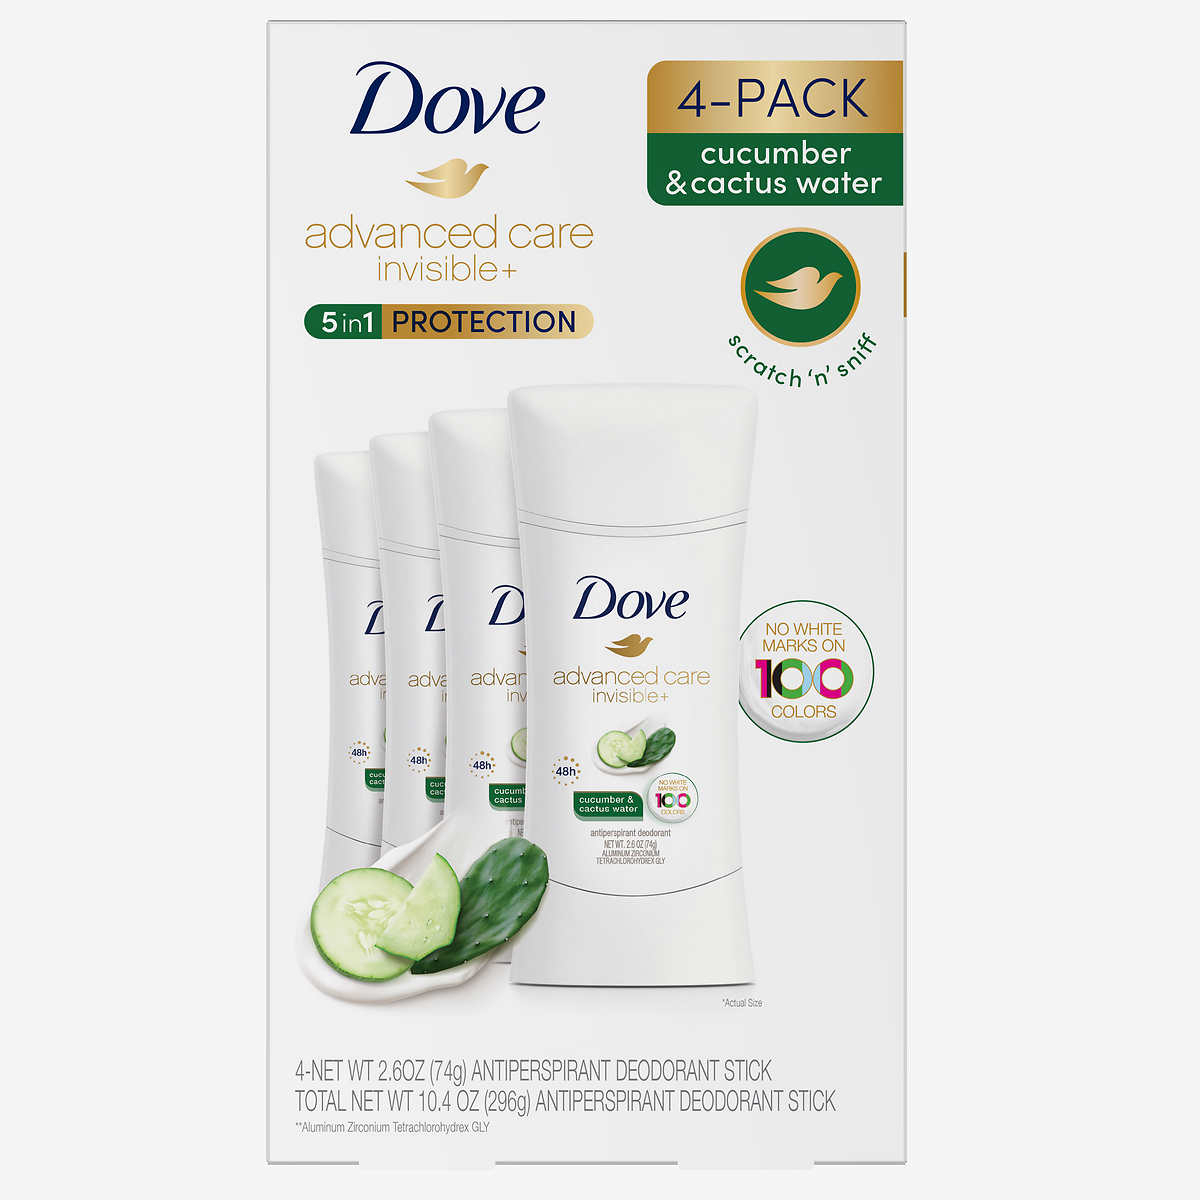 Dove Advanced Care Invisible+ Antiperspirant Deodorant, 2.6 Ounce (Pack Of 4)